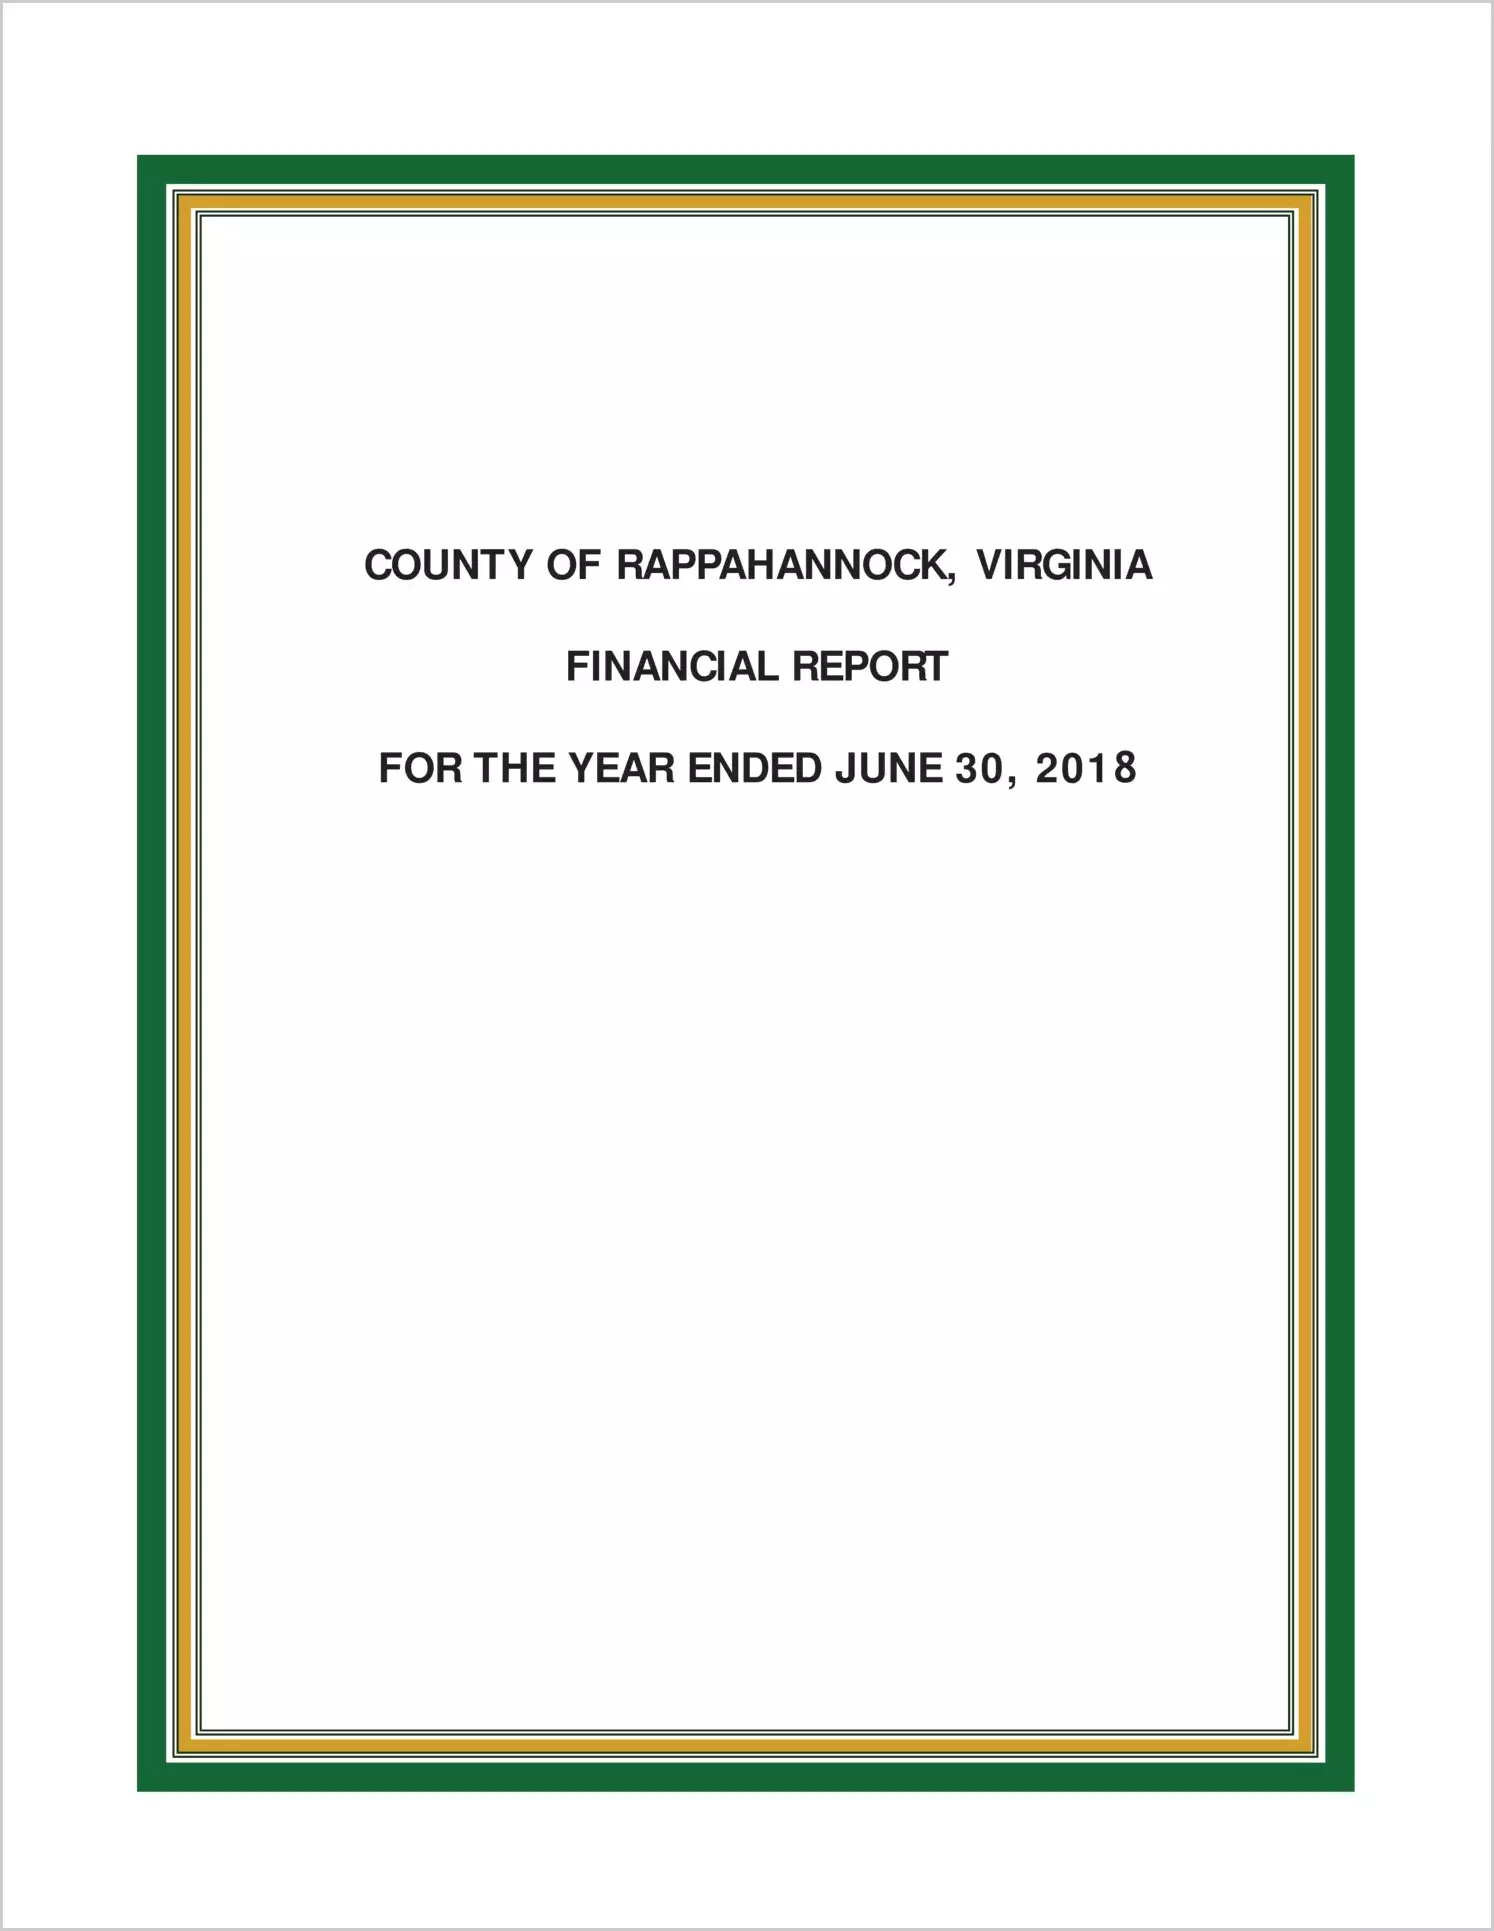 2018 Annual Financial Report-Reissued for County of Rappahannock